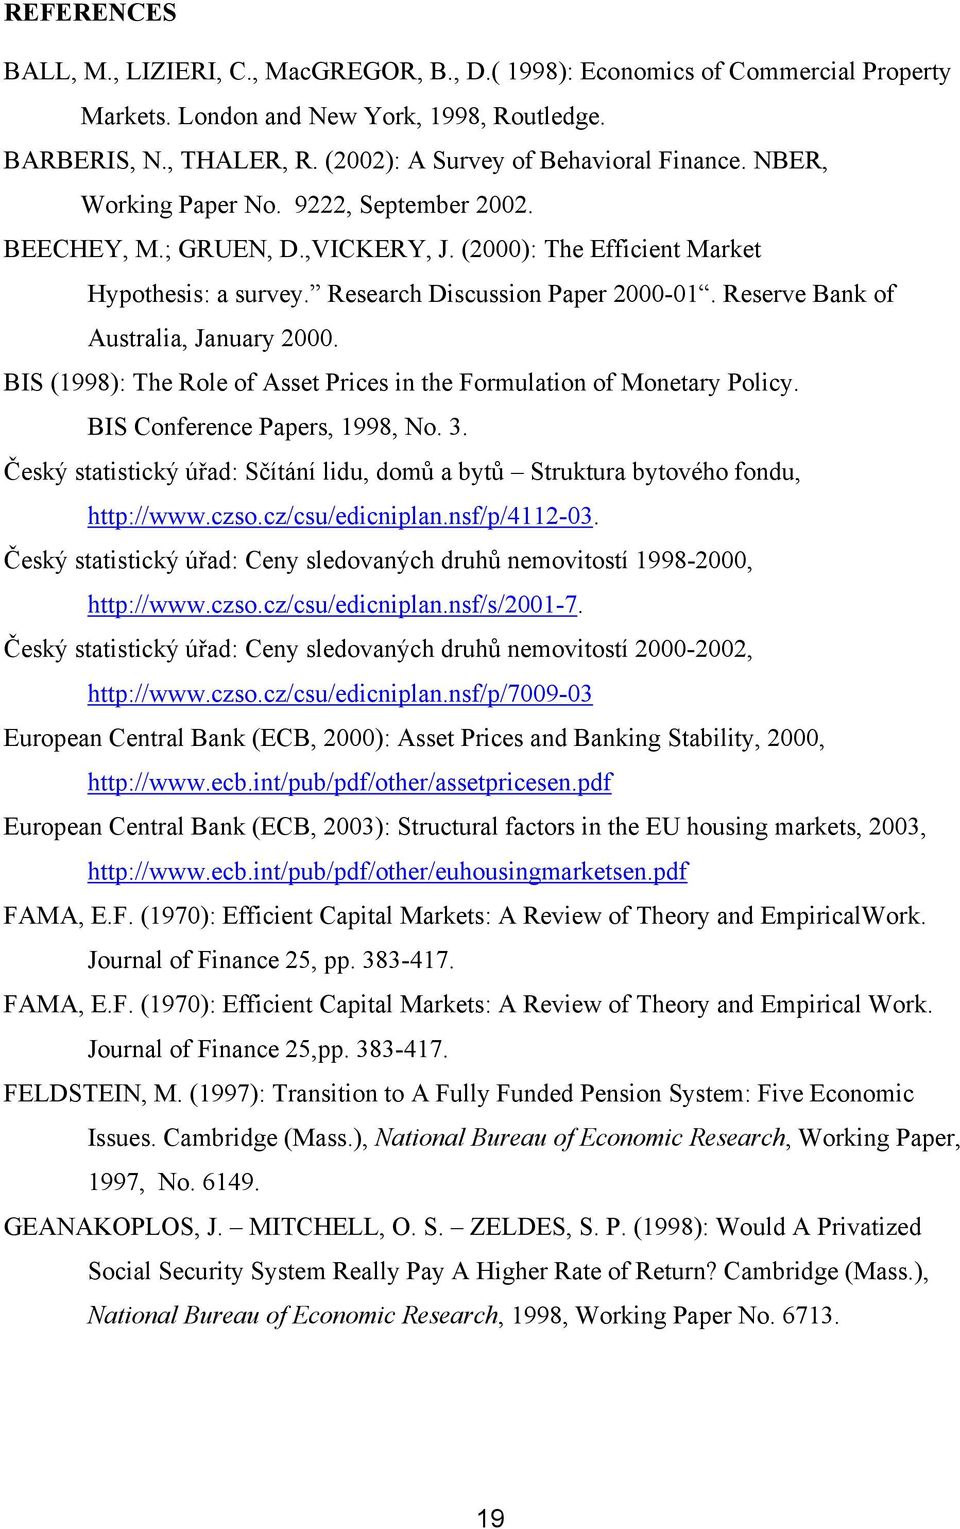 Research Discussion Paper 2000-01. Reserve Bank of Australia, January 2000. BIS (1998): The Role of Asset Prices in the Formulation of Monetary Policy. BIS Conference Papers, 1998, No. 3.